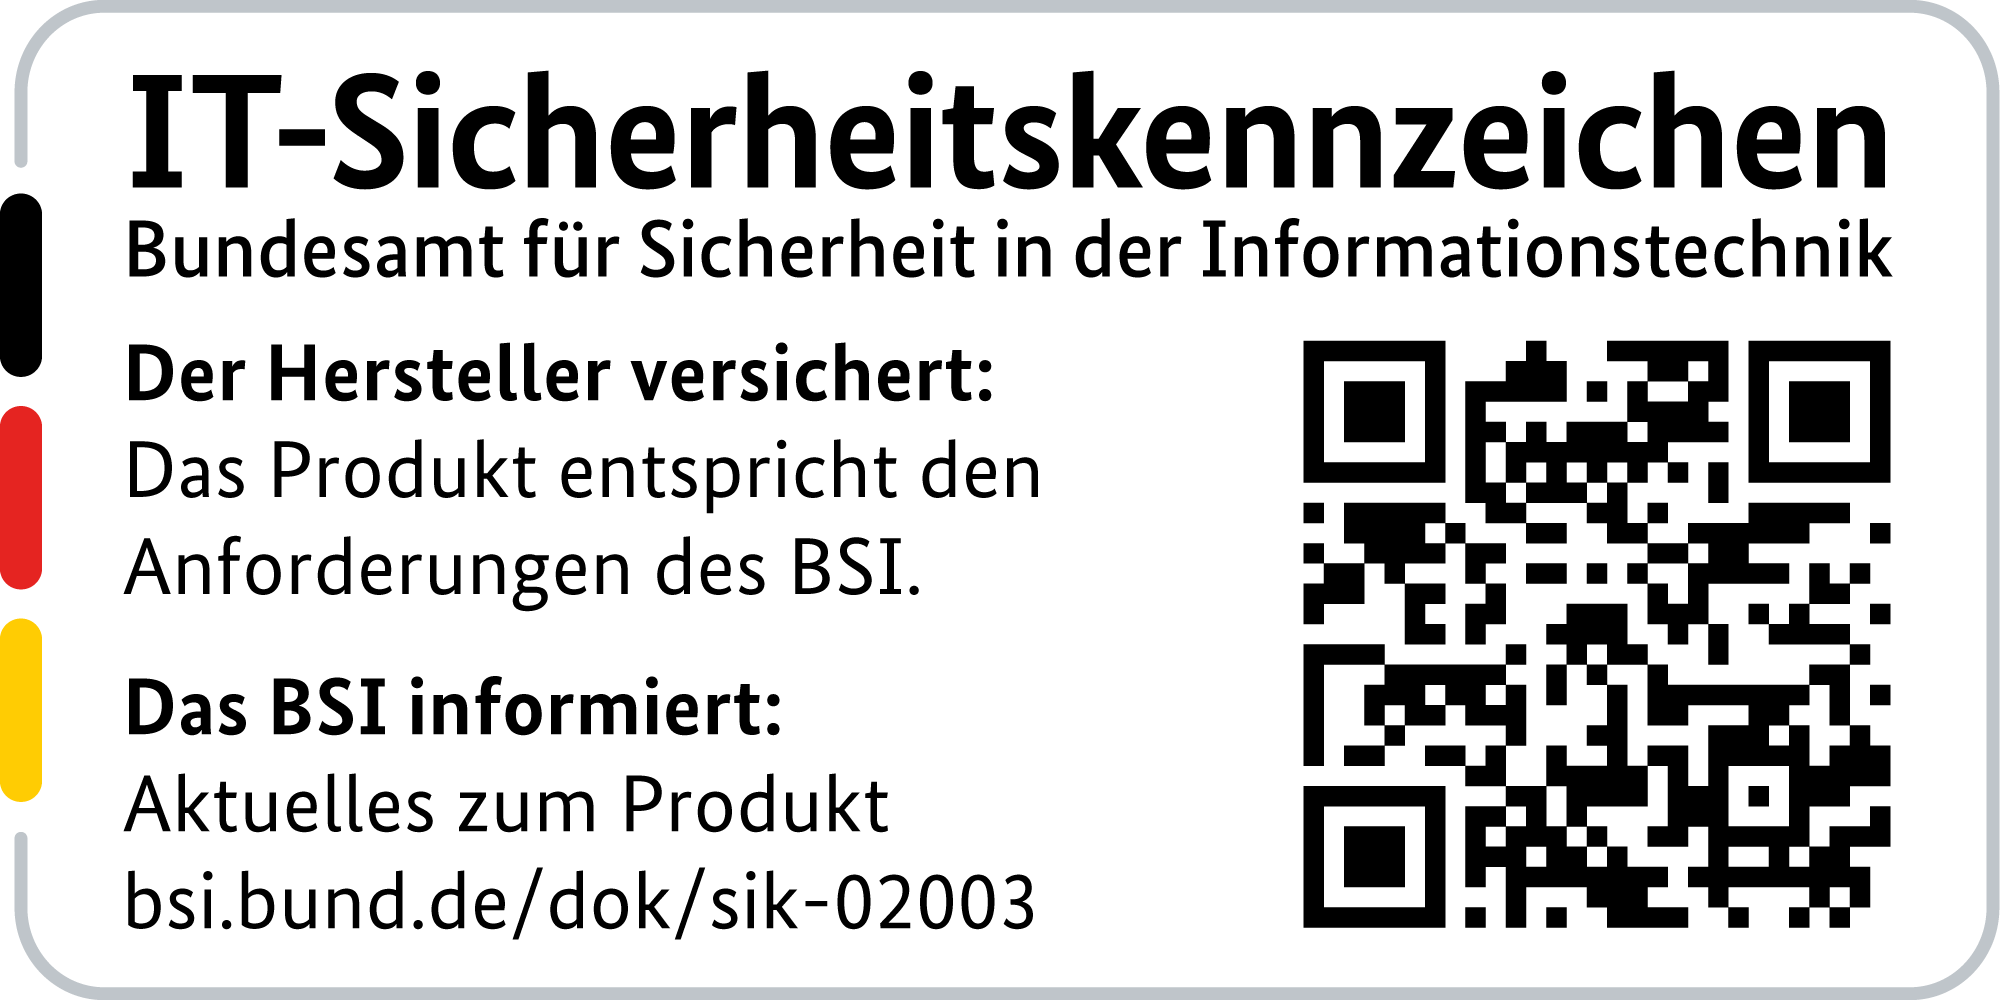 IT Security Label with QR code of the German BSI for LANCOM 884